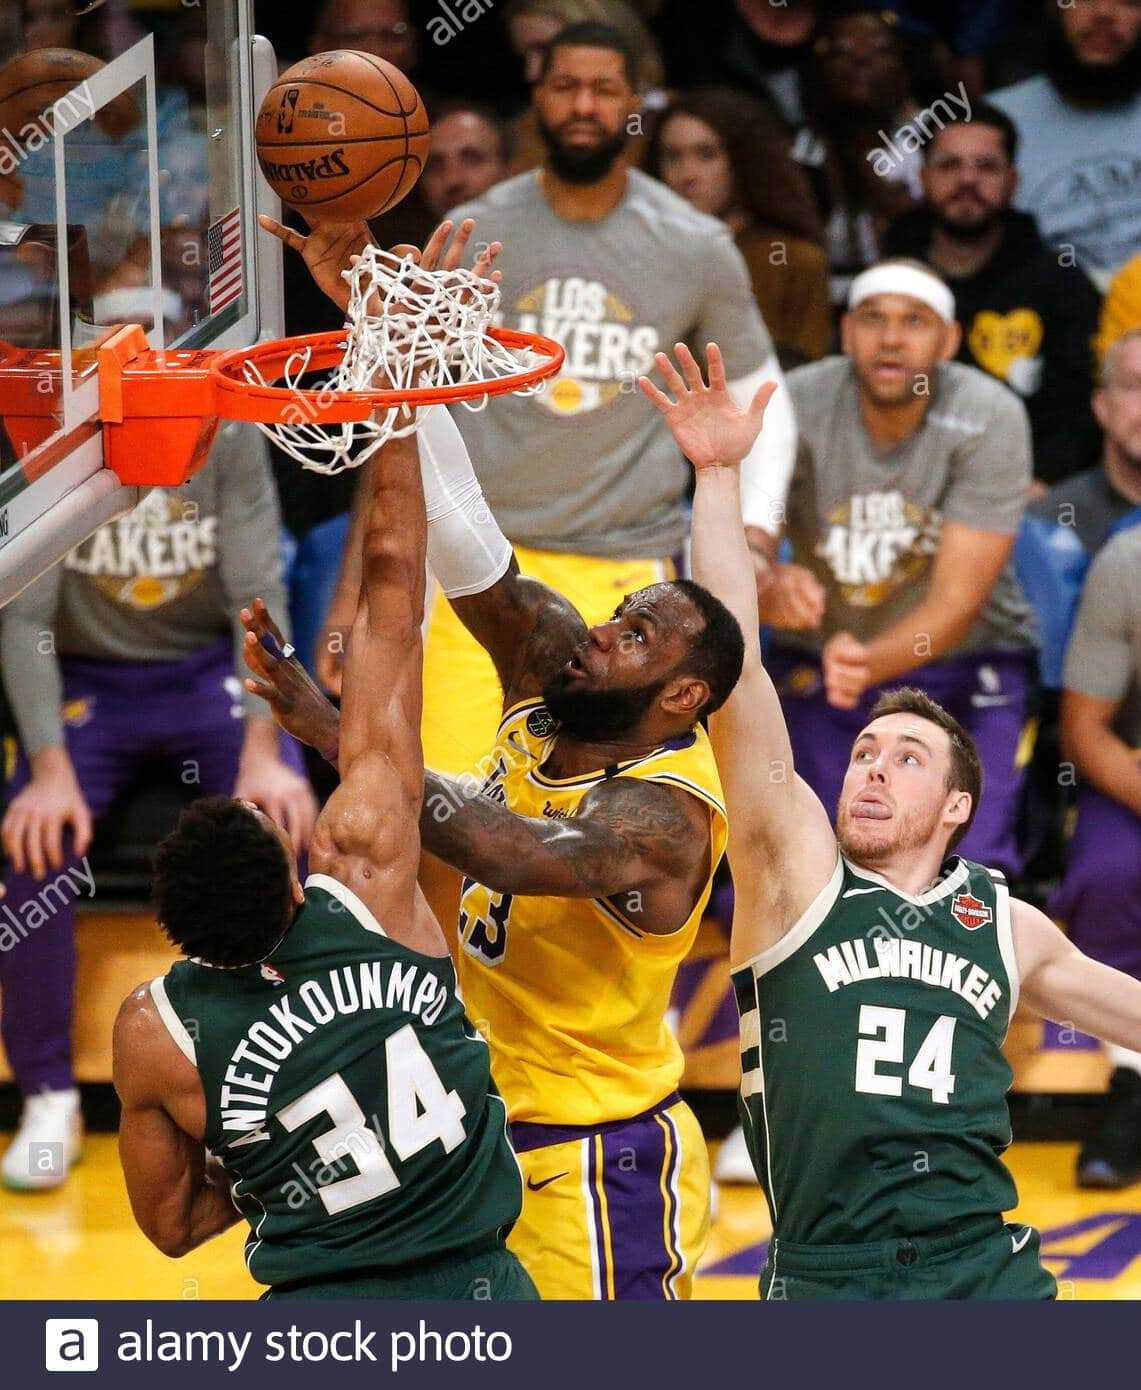 los angeles california usa 6th mar 2020 los angeles lakers lebron james 23 shoots against milwaukee bucks giannis atetokounmpo 34 and pat connaughton 24 during an nb